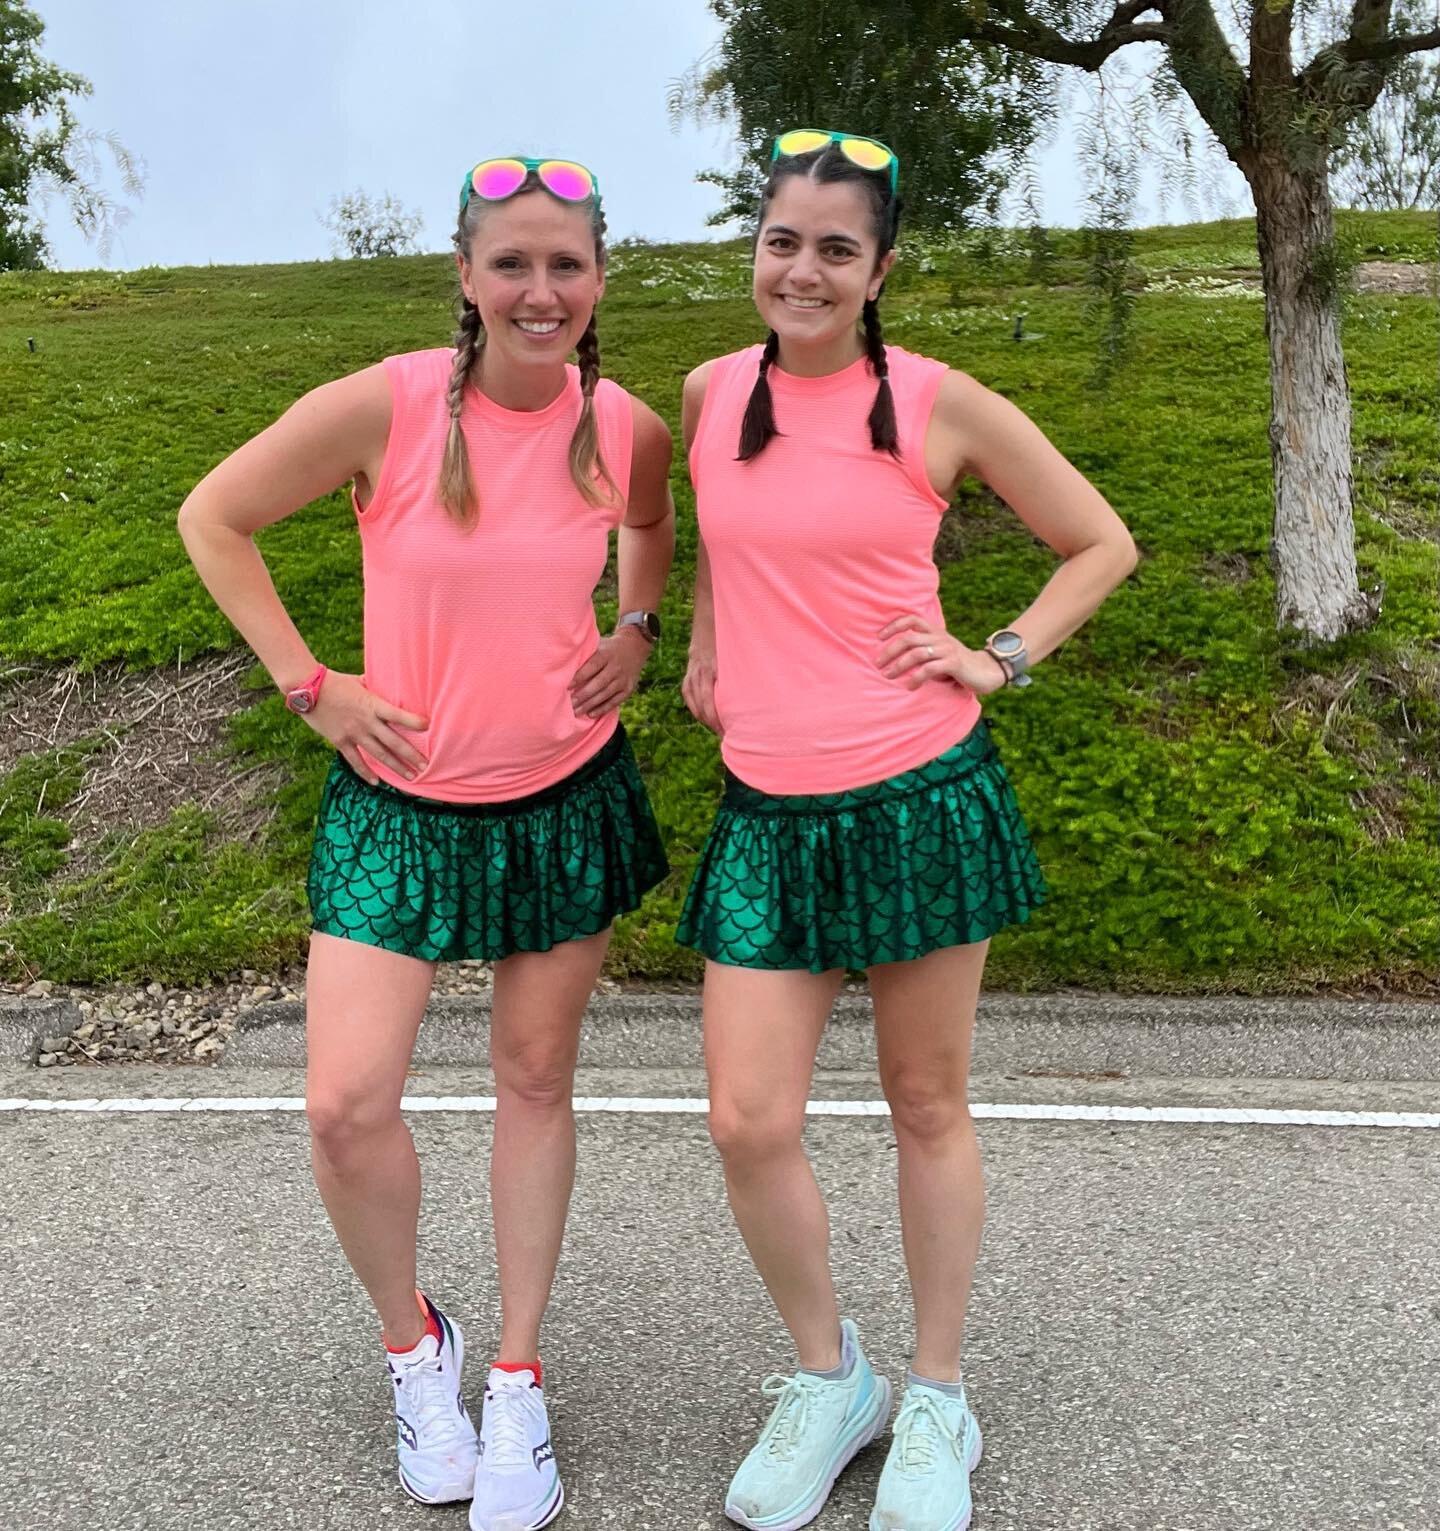 Mermaid shake out run this morning before accidentally getting more than 20,000 steps the day before a marathon 🤷🏻&zwj;♀️🤷🏼&zwj;♀️

@mountains2beachmarathon here we come! Ready for our 4am bus so that we can run to the beach!!! 

#marathon #funpa